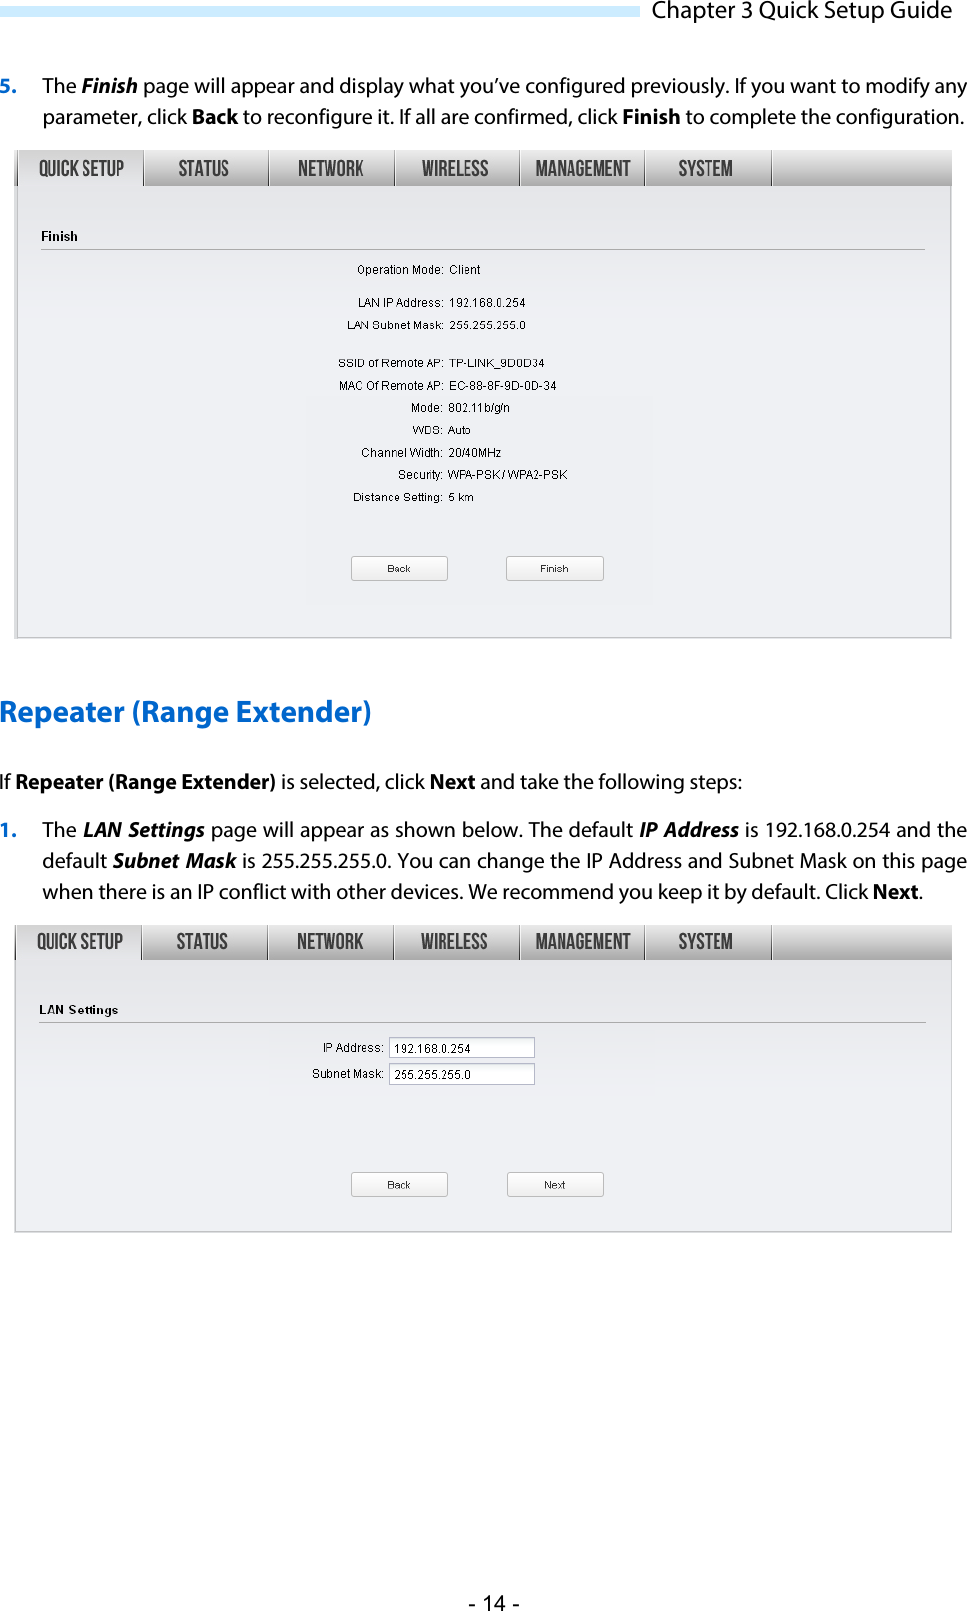  Chapter 3 Quick Setup Guide 5. The Finish page will appear and display what you’ve configured previously. If you want to modify any parameter, click Back to reconfigure it. If all are confirmed, click Finish to complete the configuration.  Repeater (Range Extender) If Repeater (Range Extender) is selected, click Next and take the following steps: 1. The LAN Settings page will appear as shown below. The default IP Address is 192.168.0.254 and the default Subnet  Mask is 255.255.255.0. You can change the IP Address and Subnet Mask on this page when there is an IP conflict with other devices. We recommend you keep it by default. Click Next.  - 14 - 